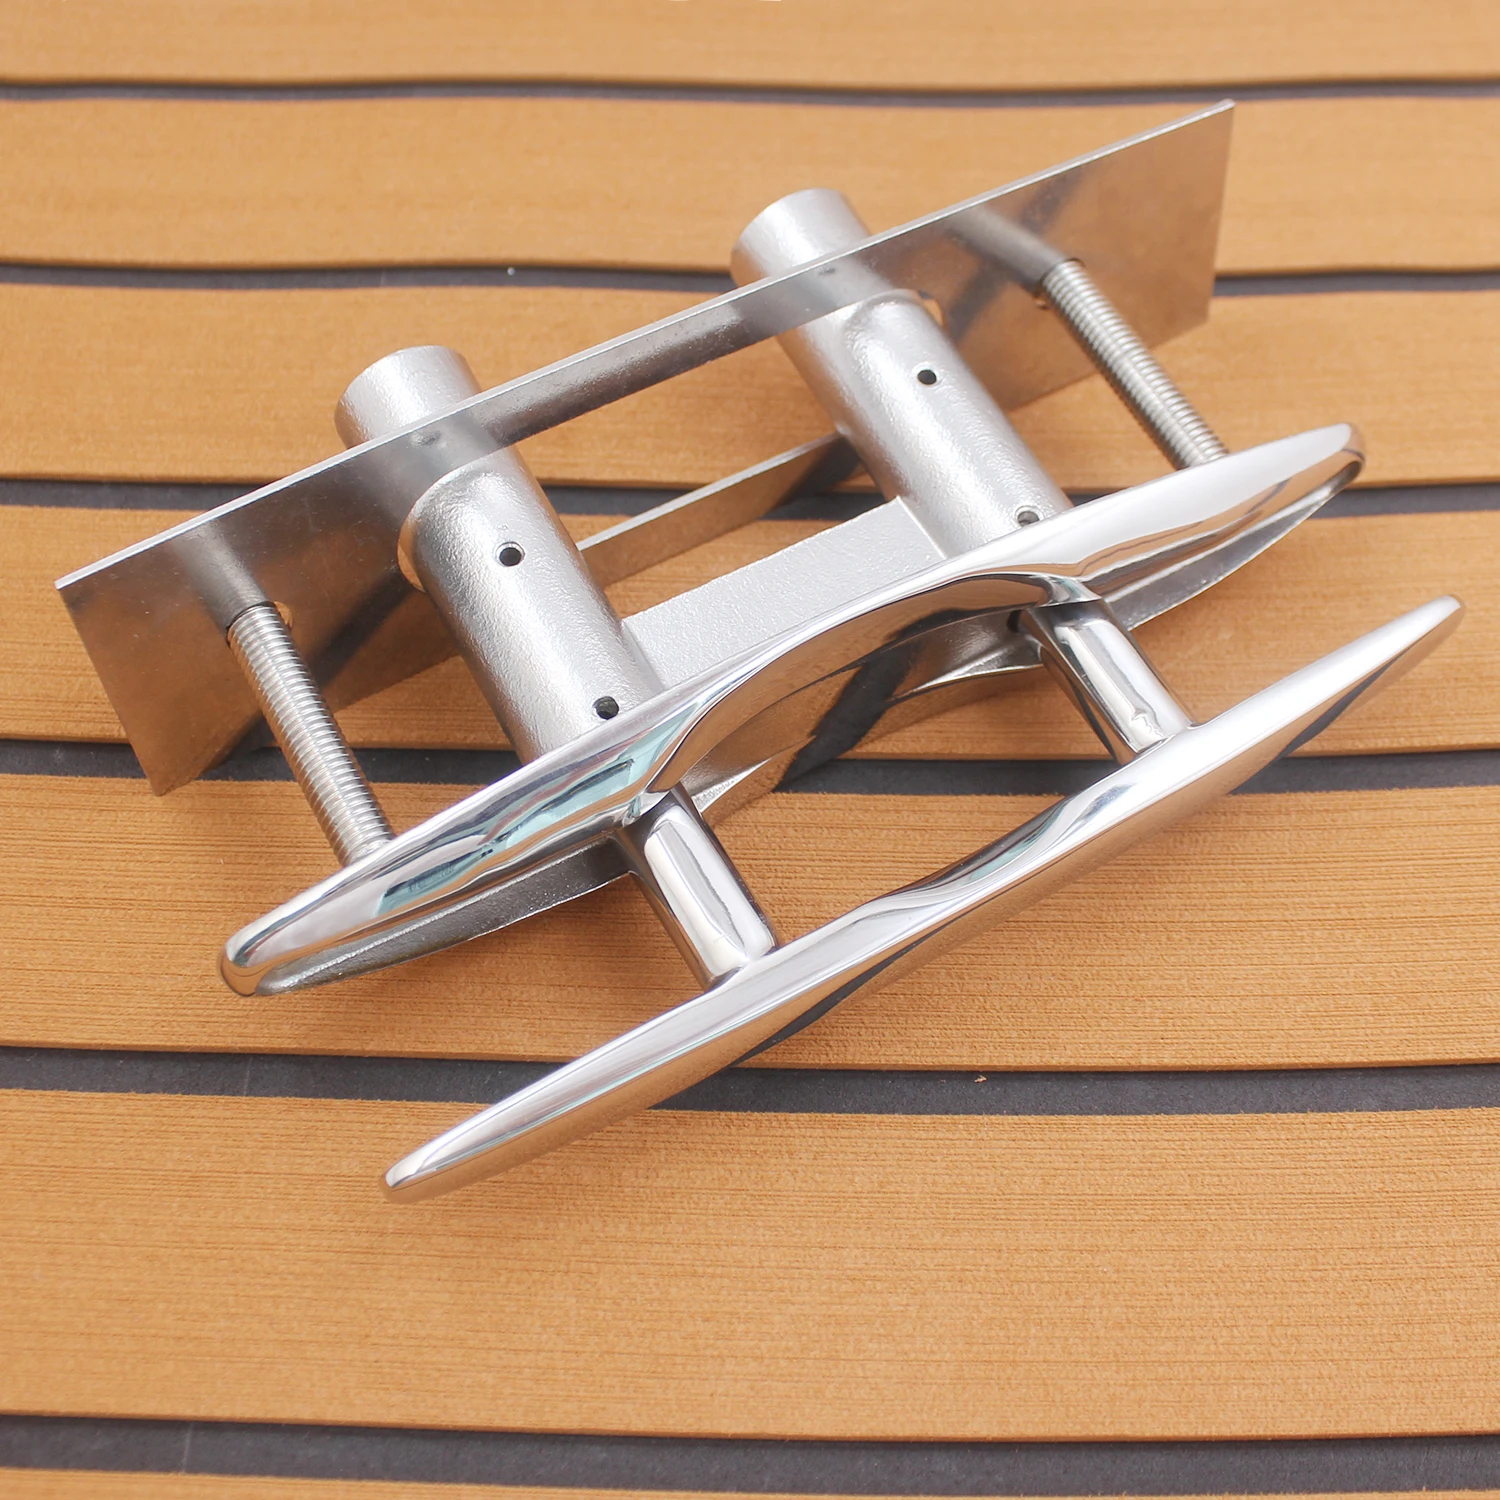 2 Pcs 5 inch Boat Pull Up Cleat Docking Marine Stainless Steel 316 Pop Up Cleat Retractable Cleat enlarge